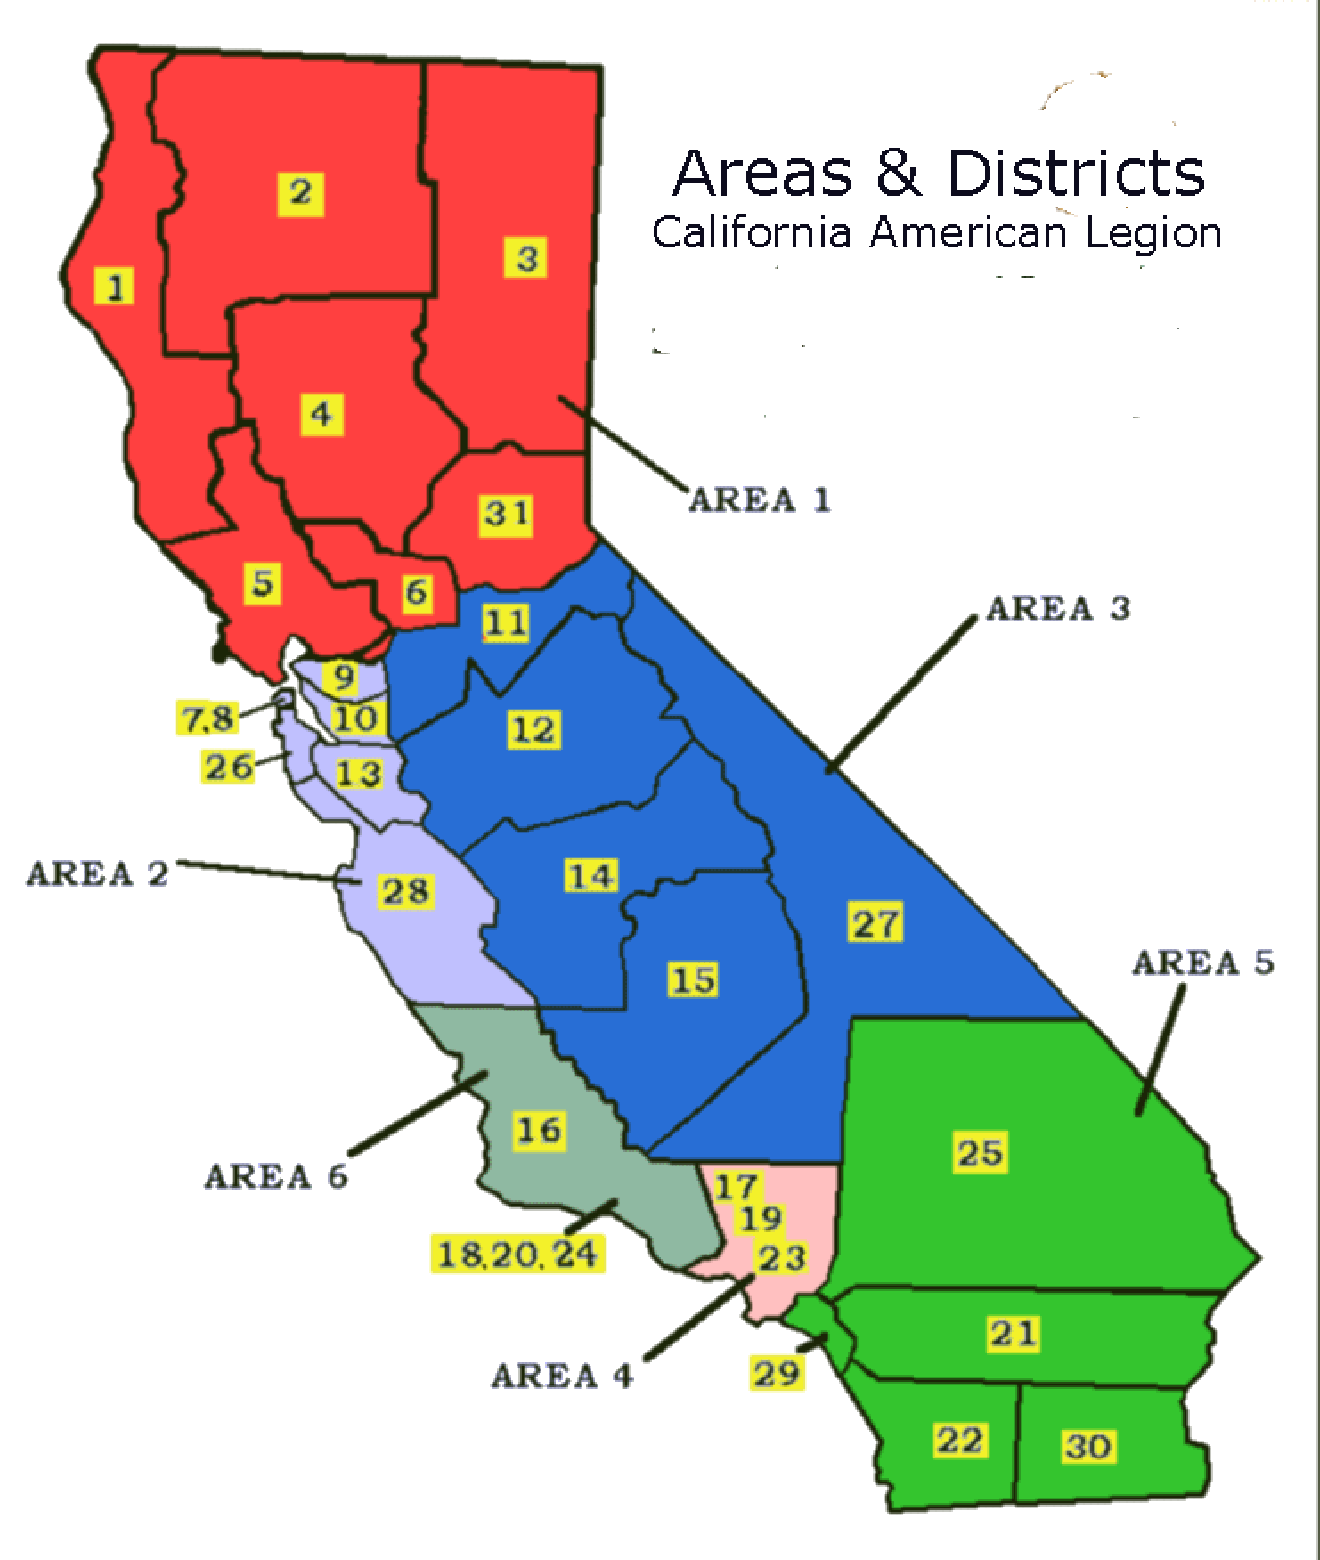 Areas & Districts